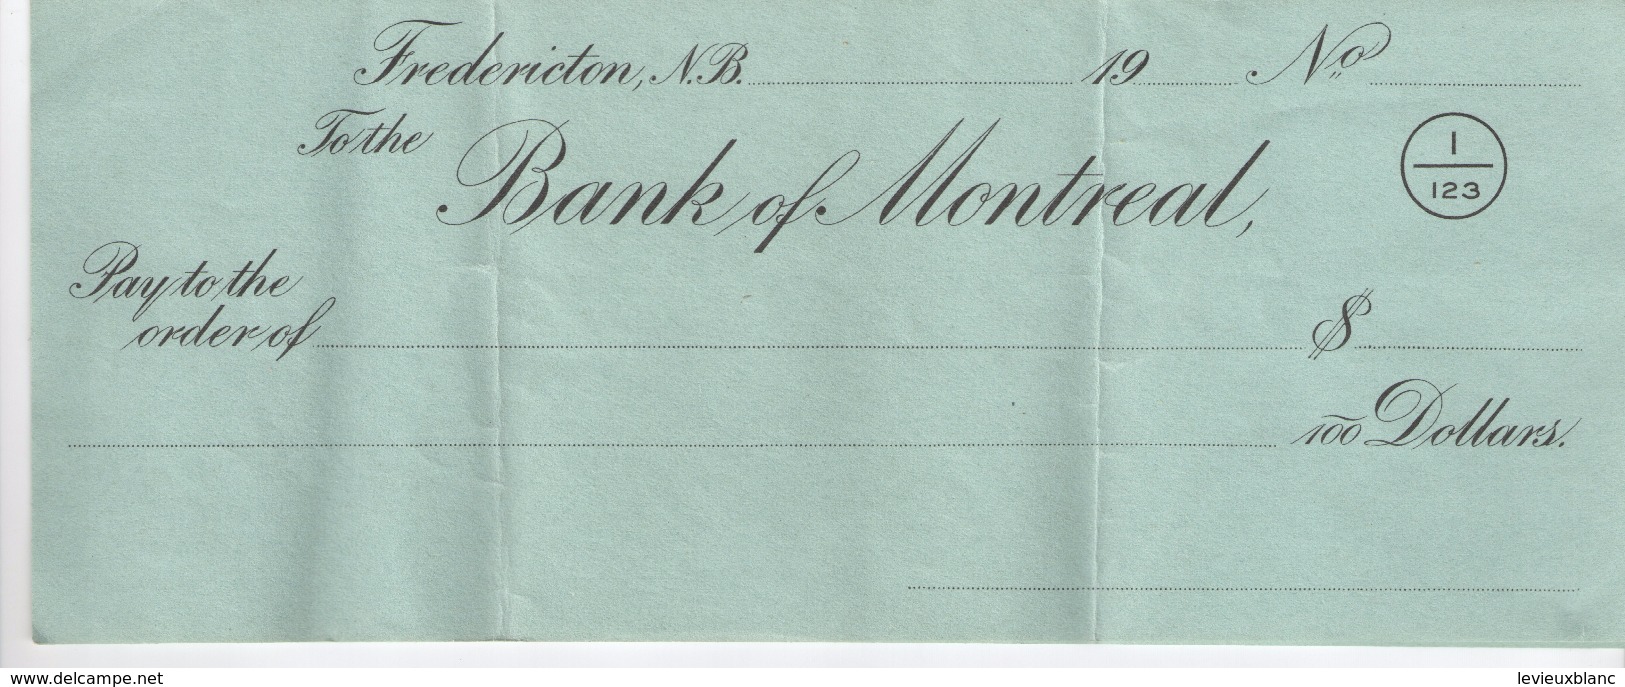 3 Chéques Bancaires/Bank Of Montreal/Fredericton/NB/100 Dollars/Sans Bénéficiaire/Vers 1950 ?      BA45 - Cheques & Traveler's Cheques